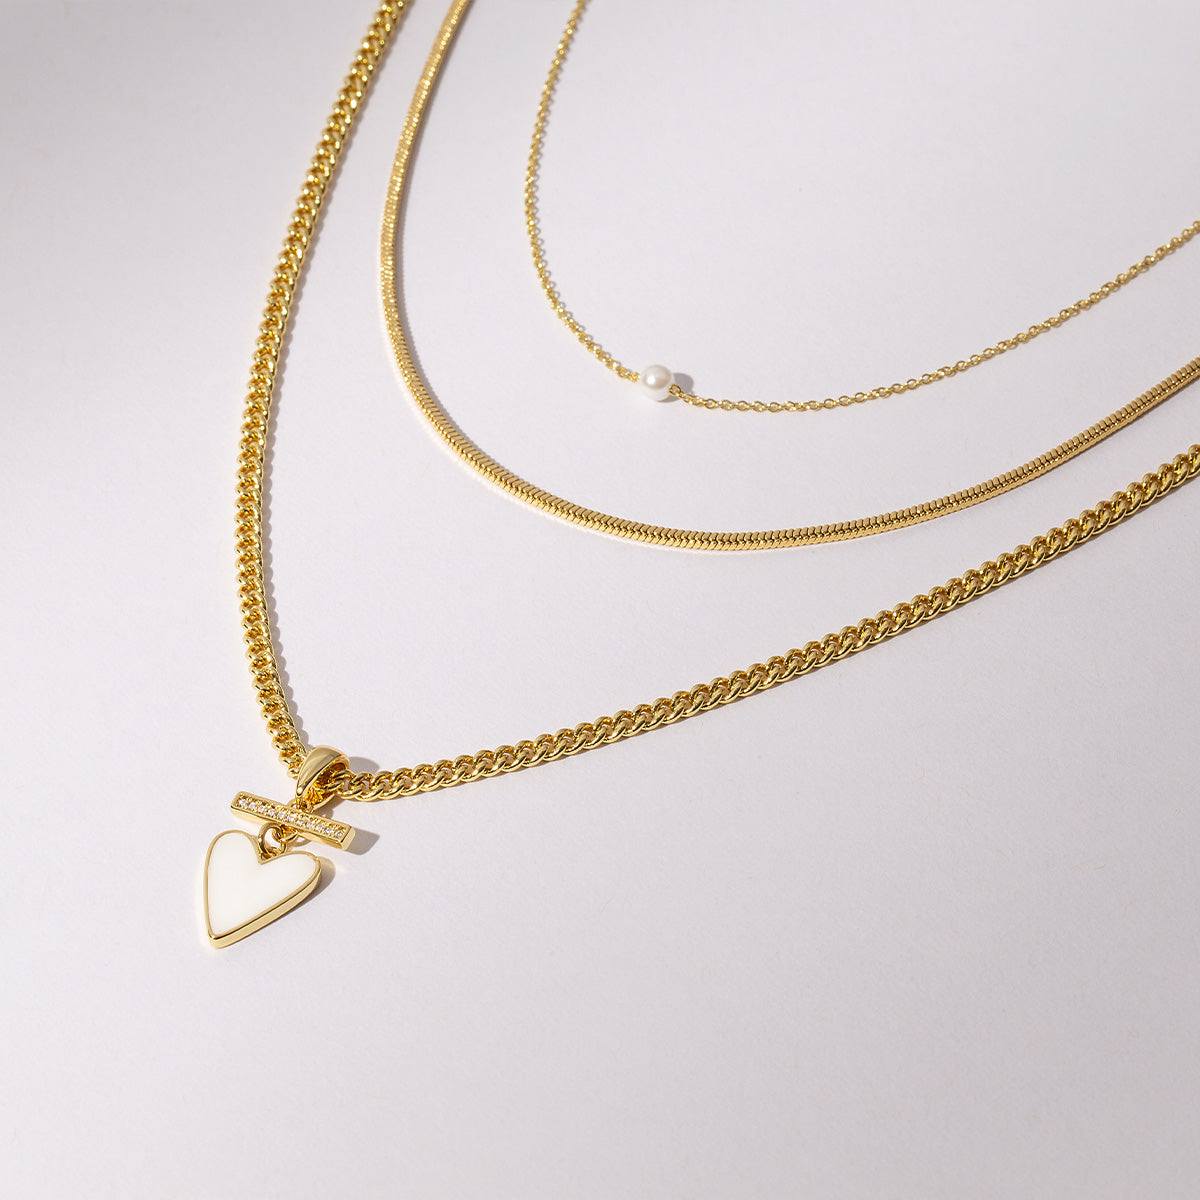 Pearl Love Necklace Set | Gold | Product Image | Uncommon James